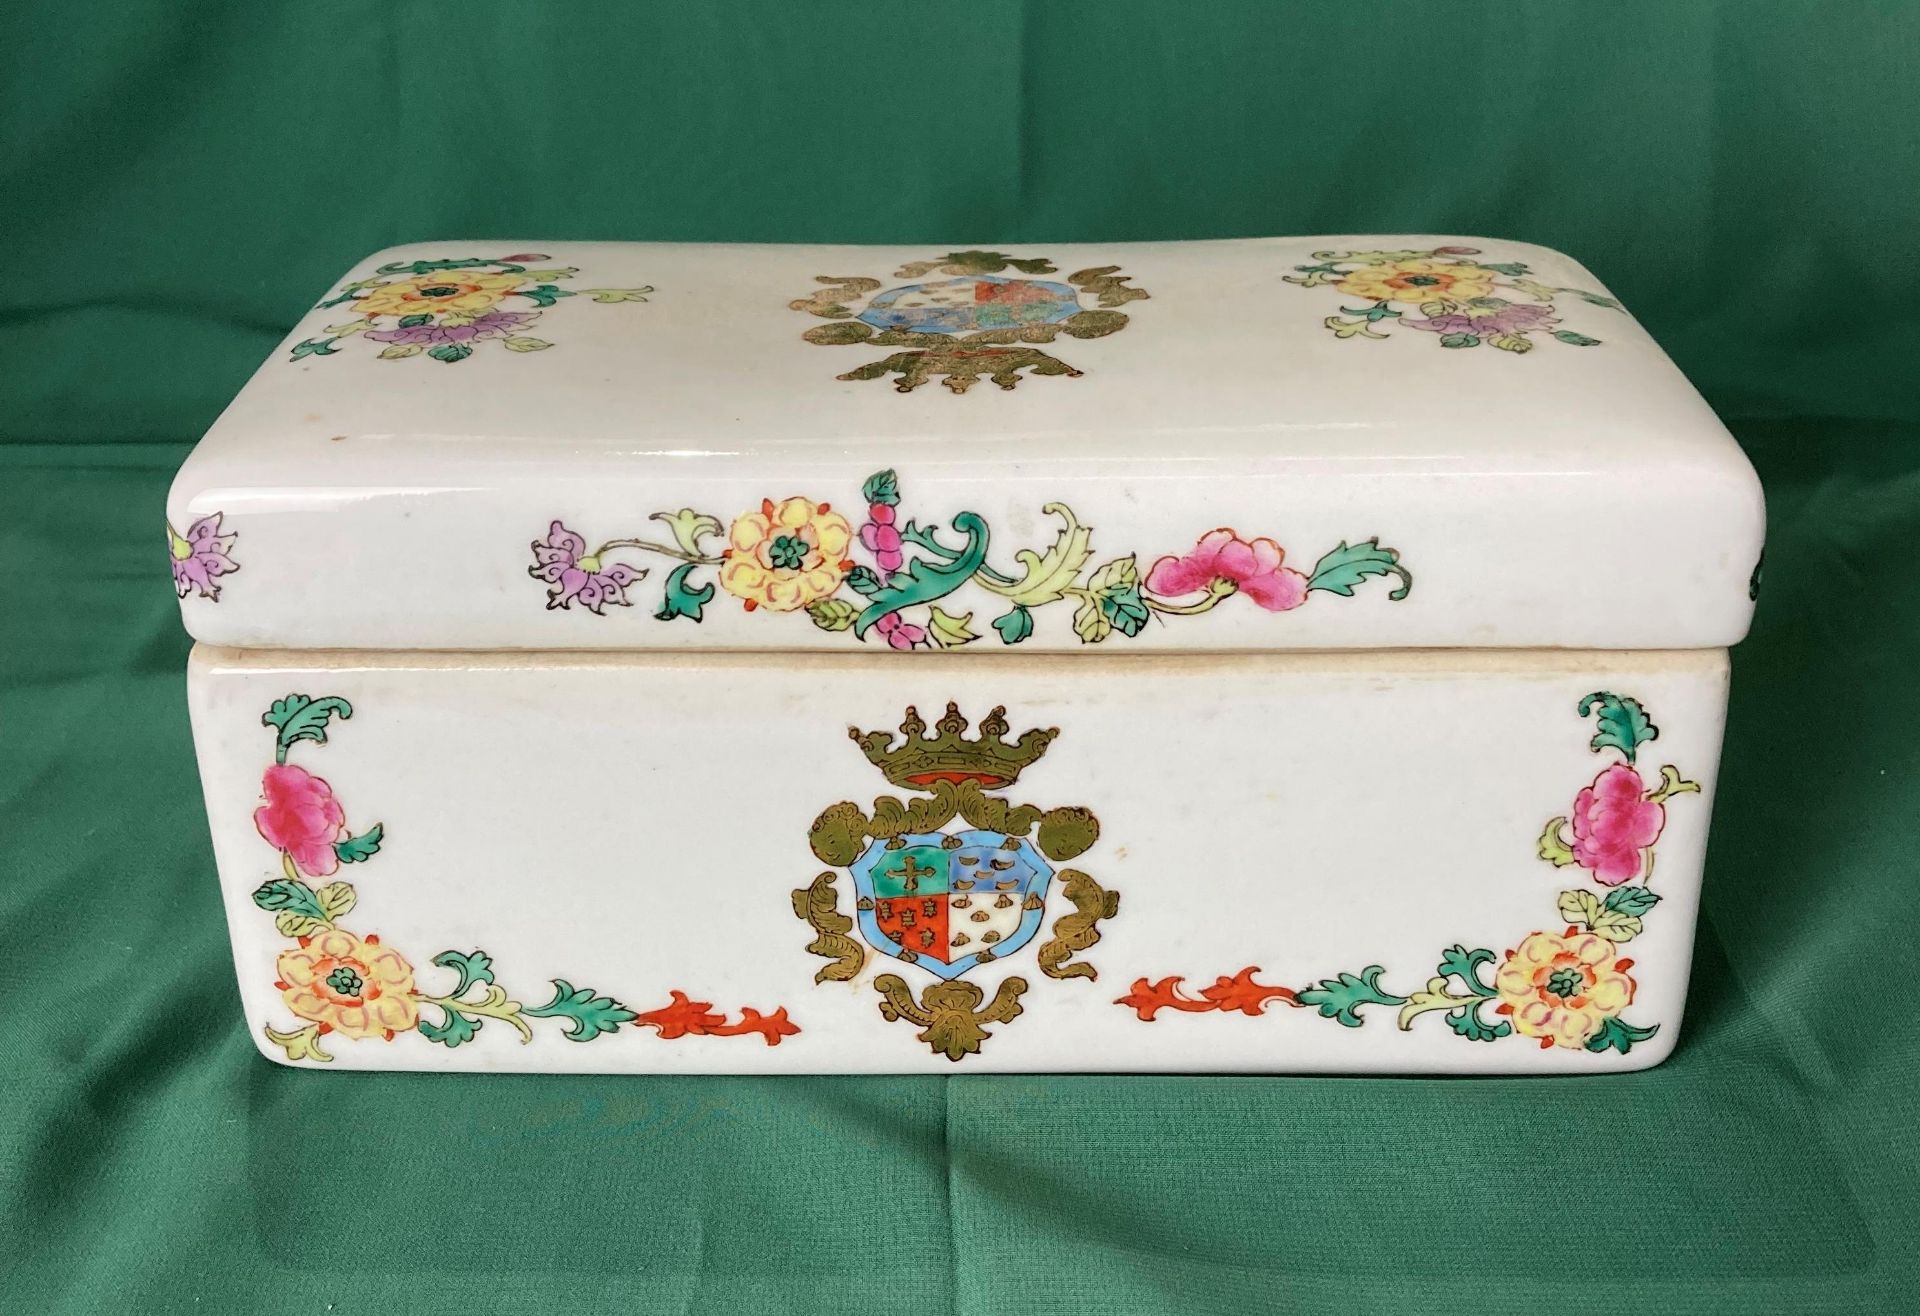 A vintage porcelain hand-painted box with Coat of Arms emblem and floral design, - Image 2 of 5